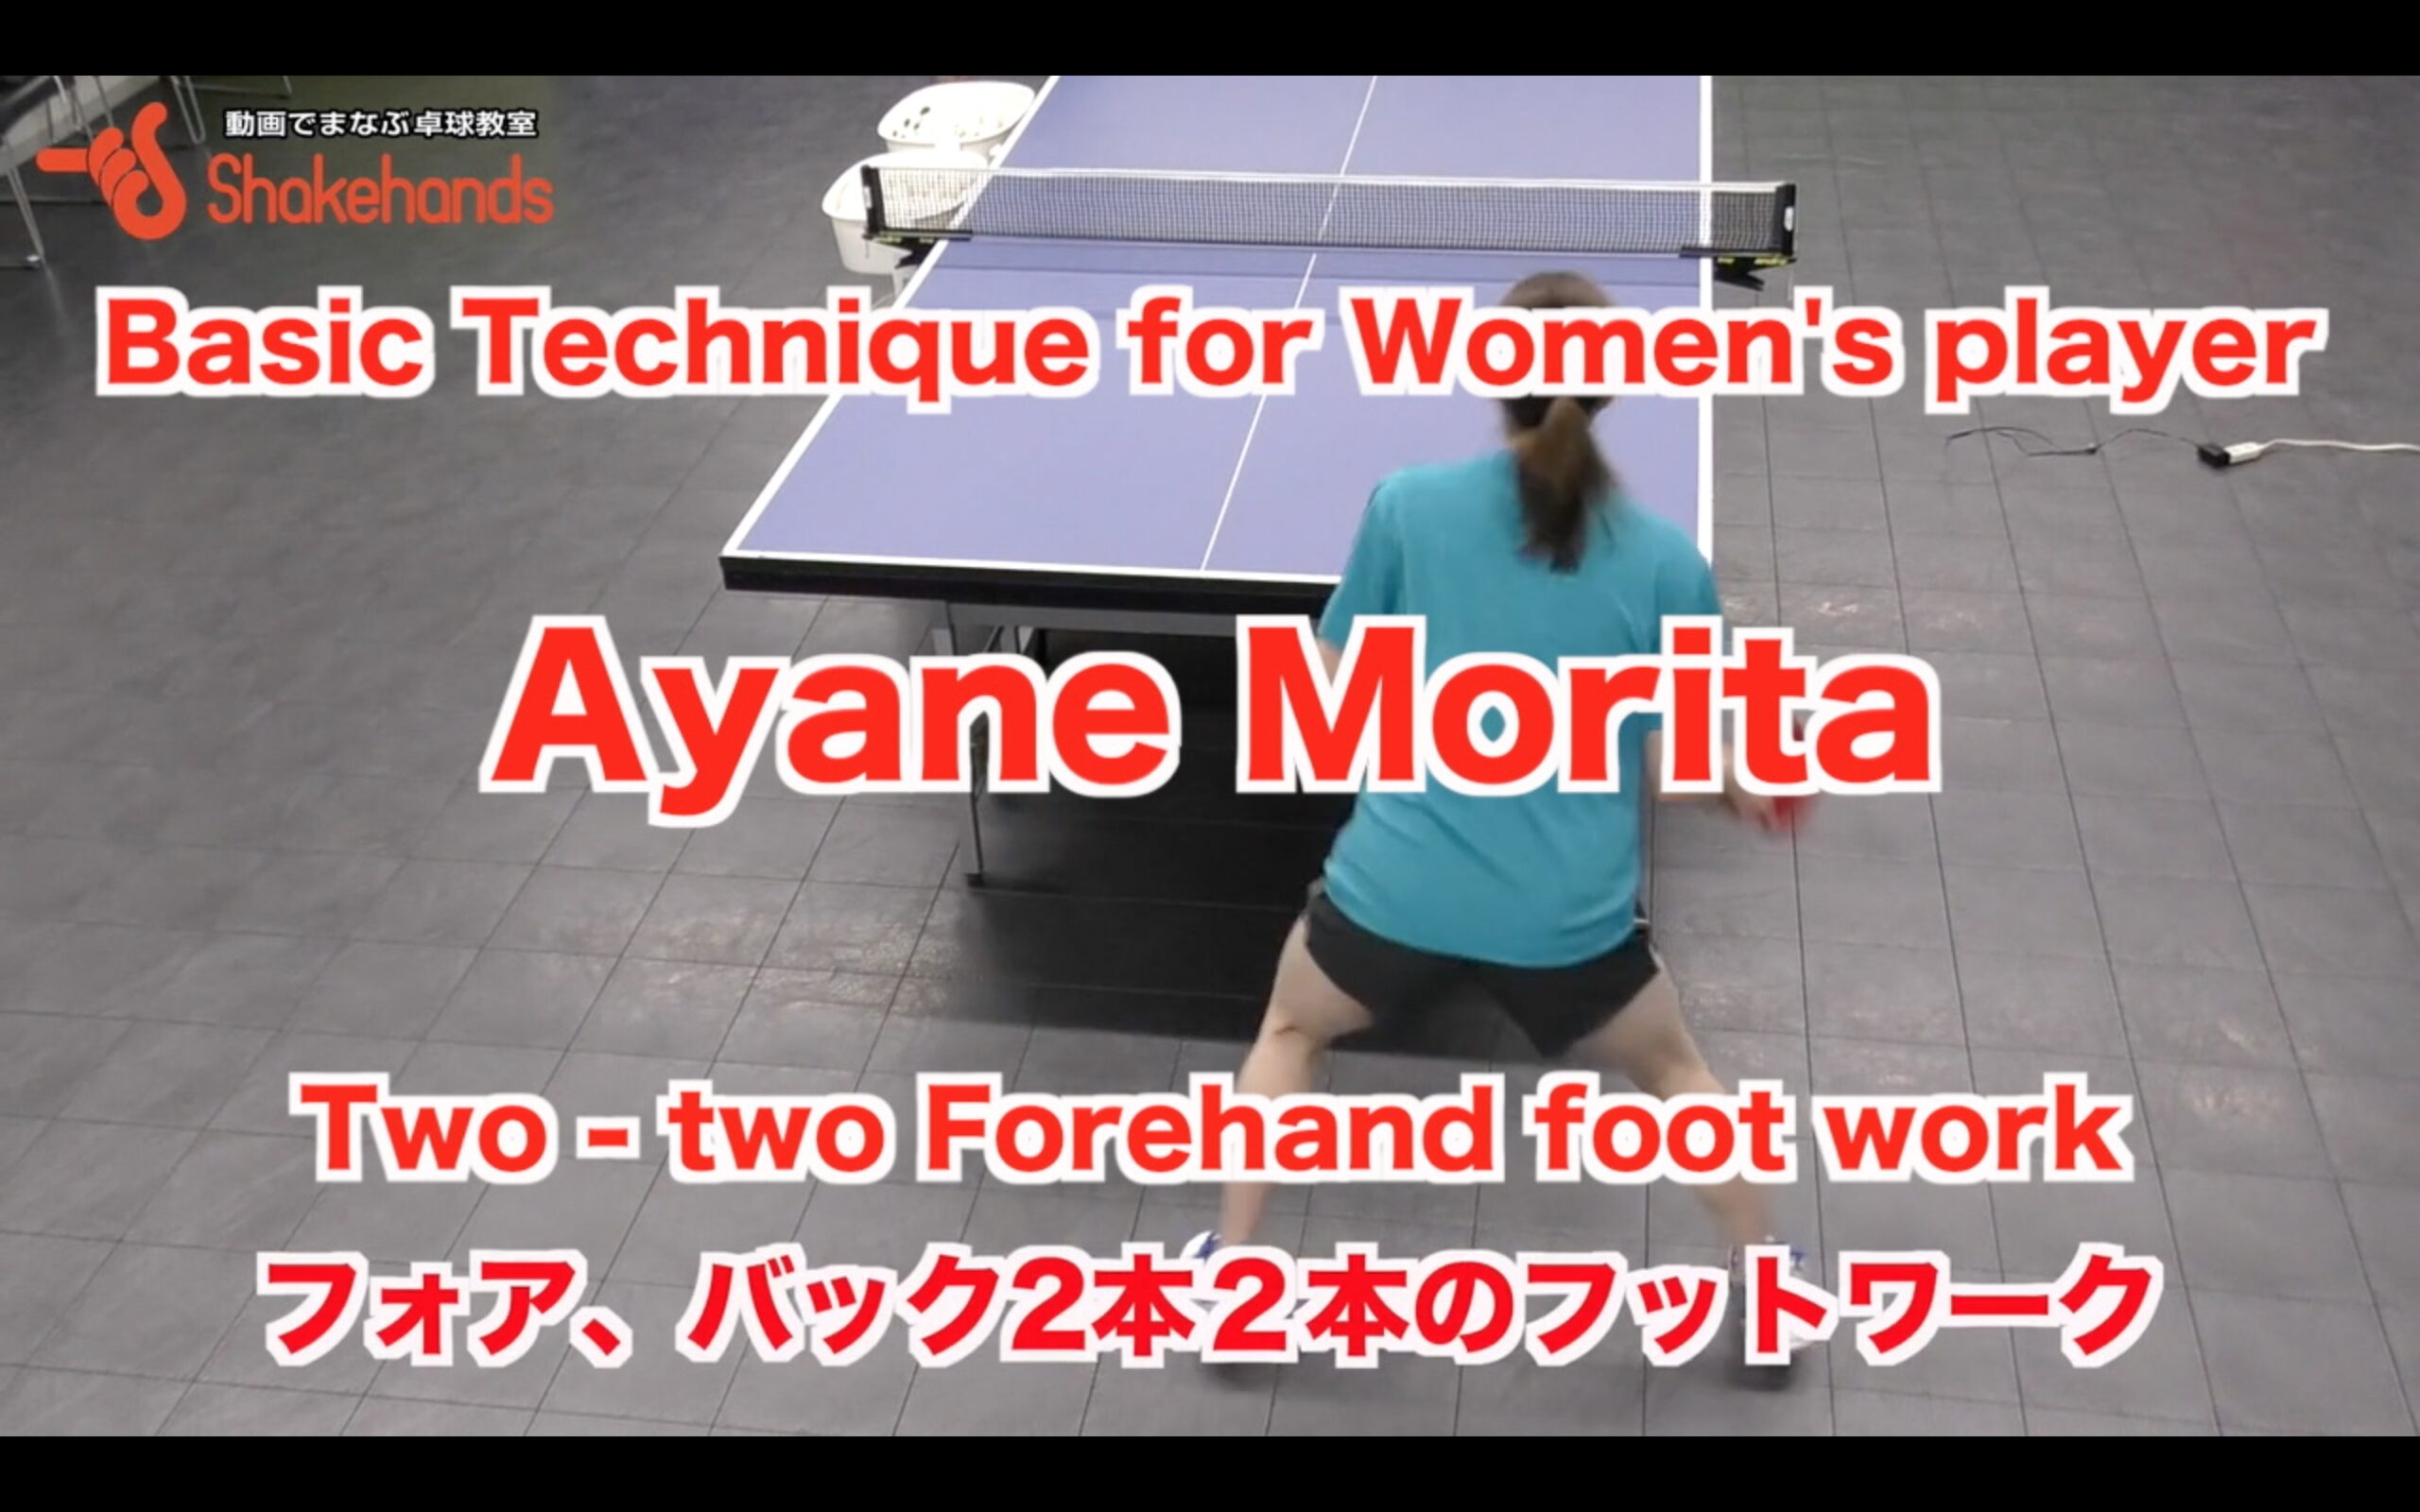 Two - two FH foot work